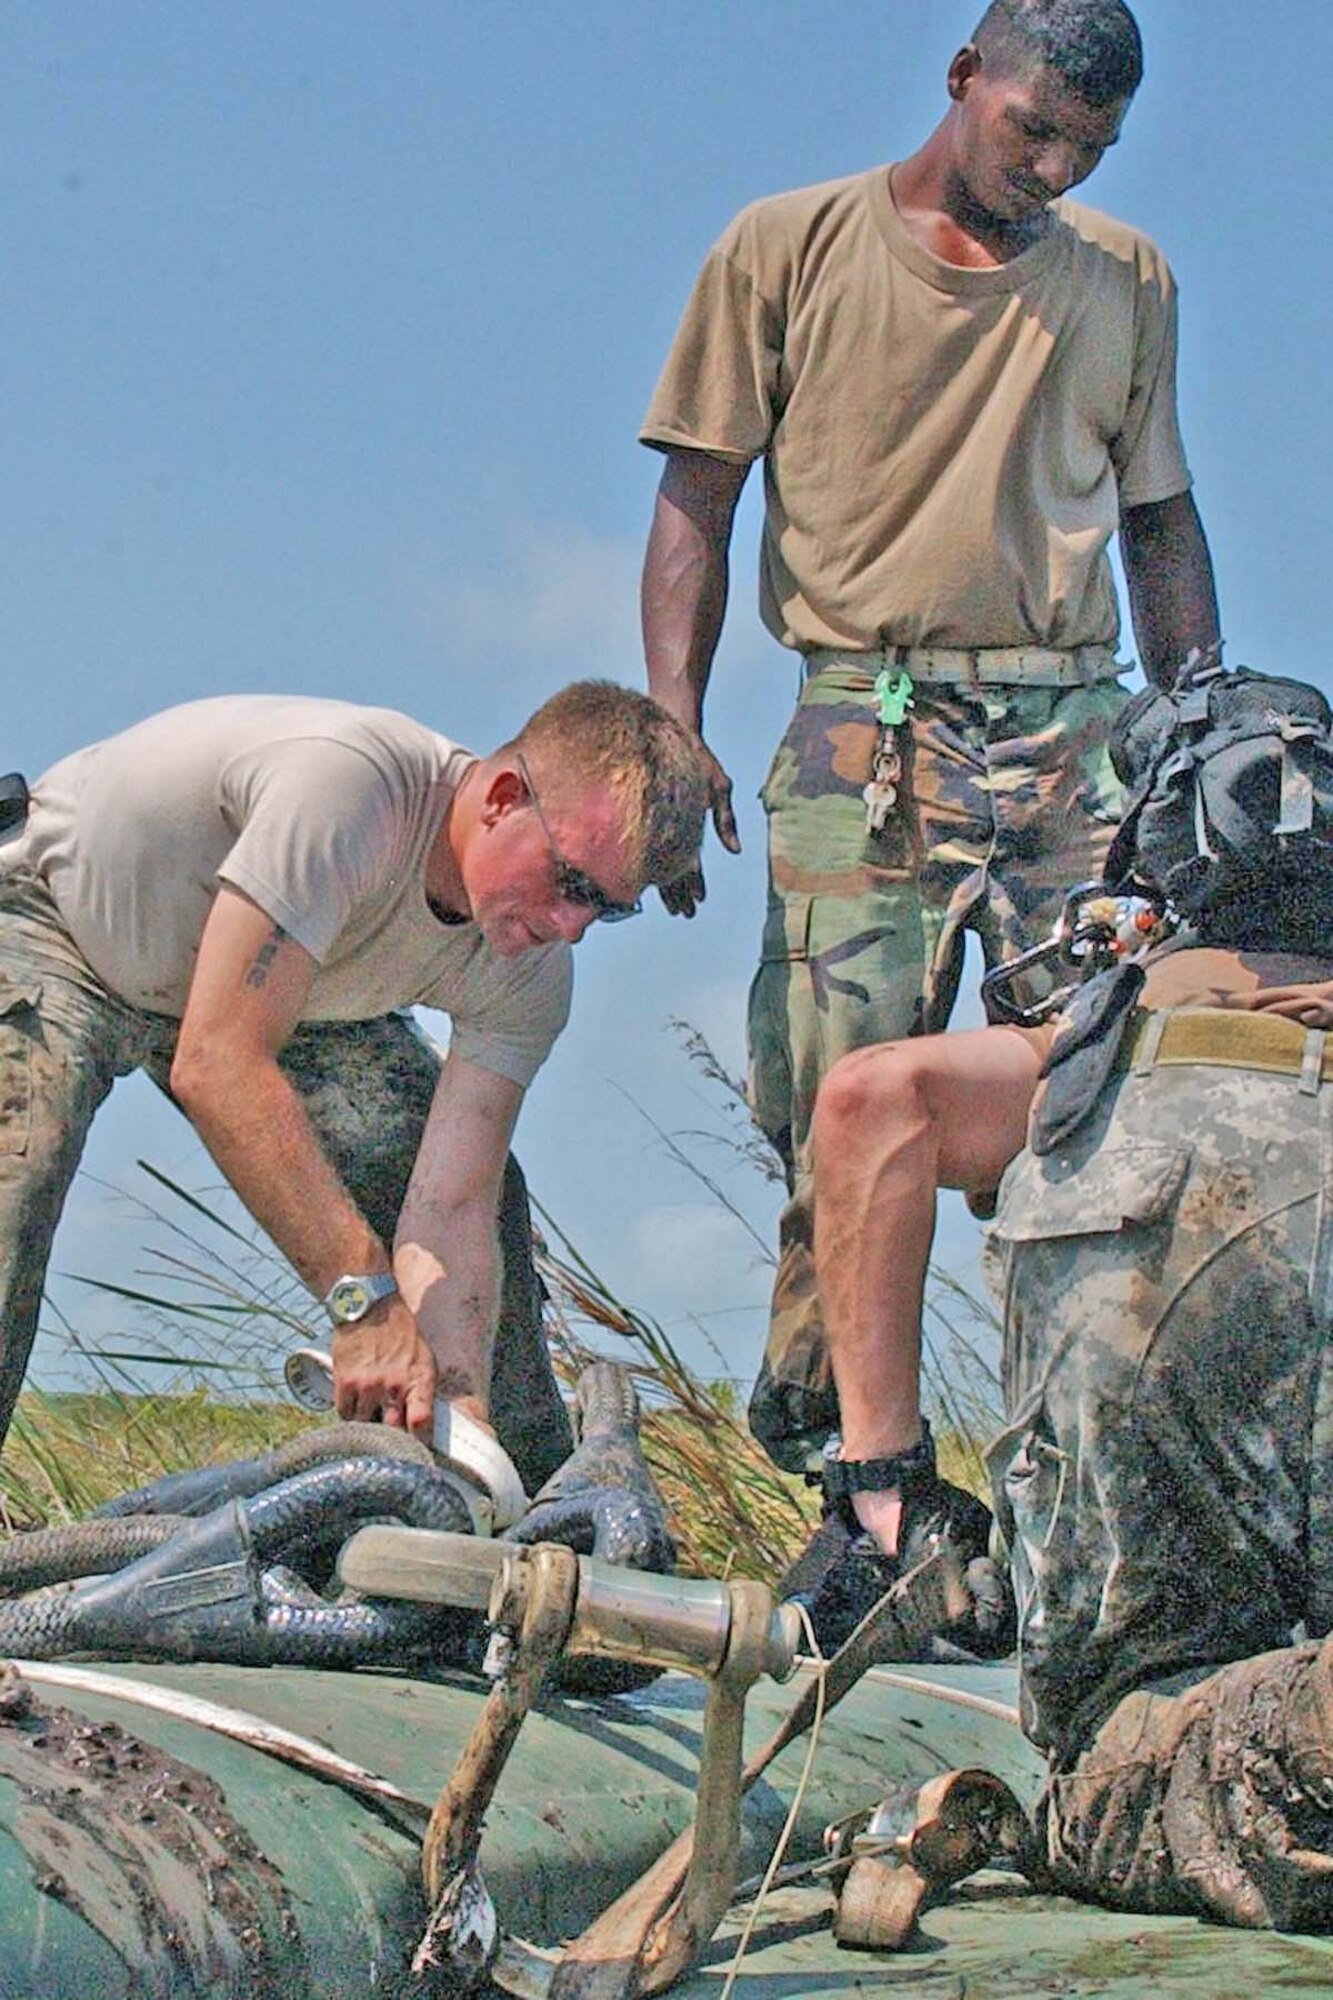 BELIZE CITY, BELIZE -- U.S. Army Sgt. Michael Linn, 1st Battalion, 228th Aviation Regiment Black Hawk crew chief, tightens one of the slingload straps on a downed Belize Defence Force BN-2B Defender aircraft. Joint Task Force-Bravo Soldiers, with assistance from troops from the Belize Defence Force, successfully rigged the downed Defender aircraft and it was successfully slingloaded onto a U.S. Army UH-60 Black Hawk helicopter and delivered to the BDF air station at Belize City International Airport May 3. (U.S. Air Force photo by Staff Sgt. Chyenne A. Griffin)                     